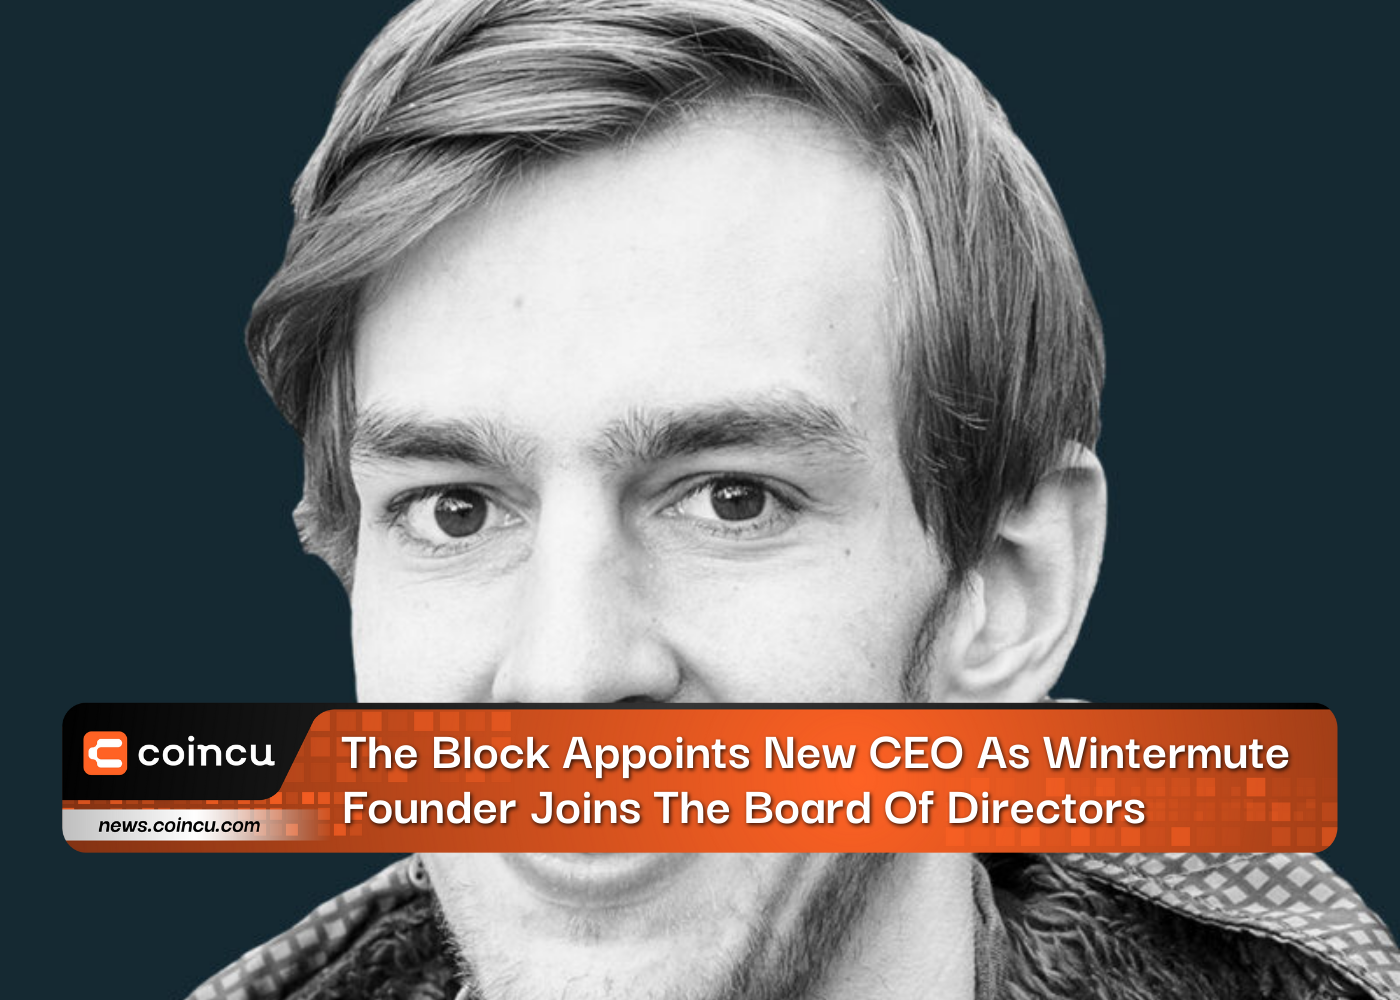 The Block Appoints New CEO As Wintermute Founder Joins The Board Of Directors